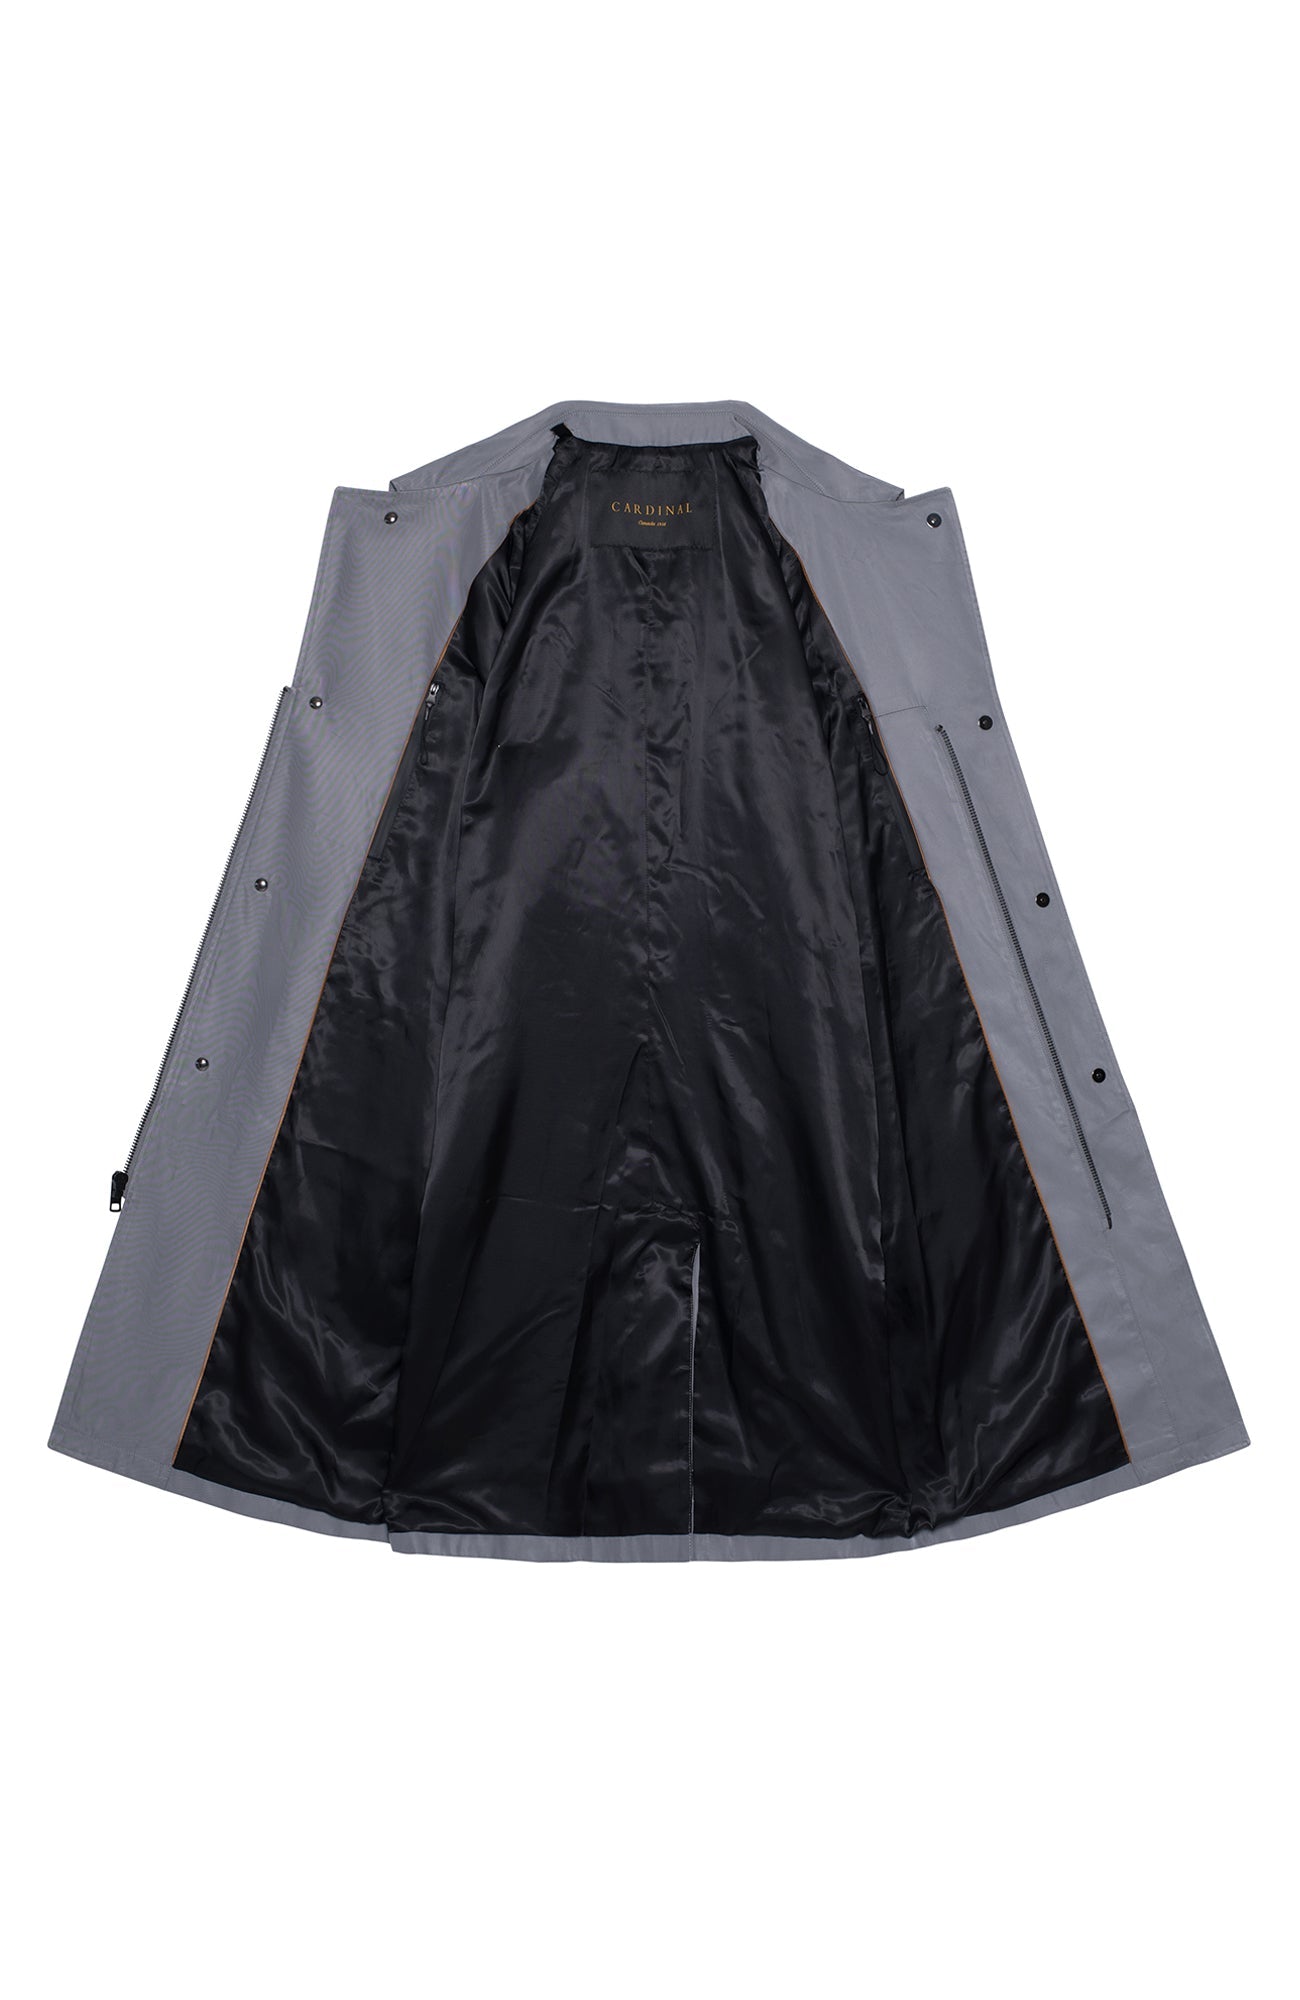 LIMITED EDITION: COLE GREY BELTED RAINCOAT - MENS - Cardinal of Canada-CA - LIMITED EDITION: COLE GREY BELTED RAINCOAT